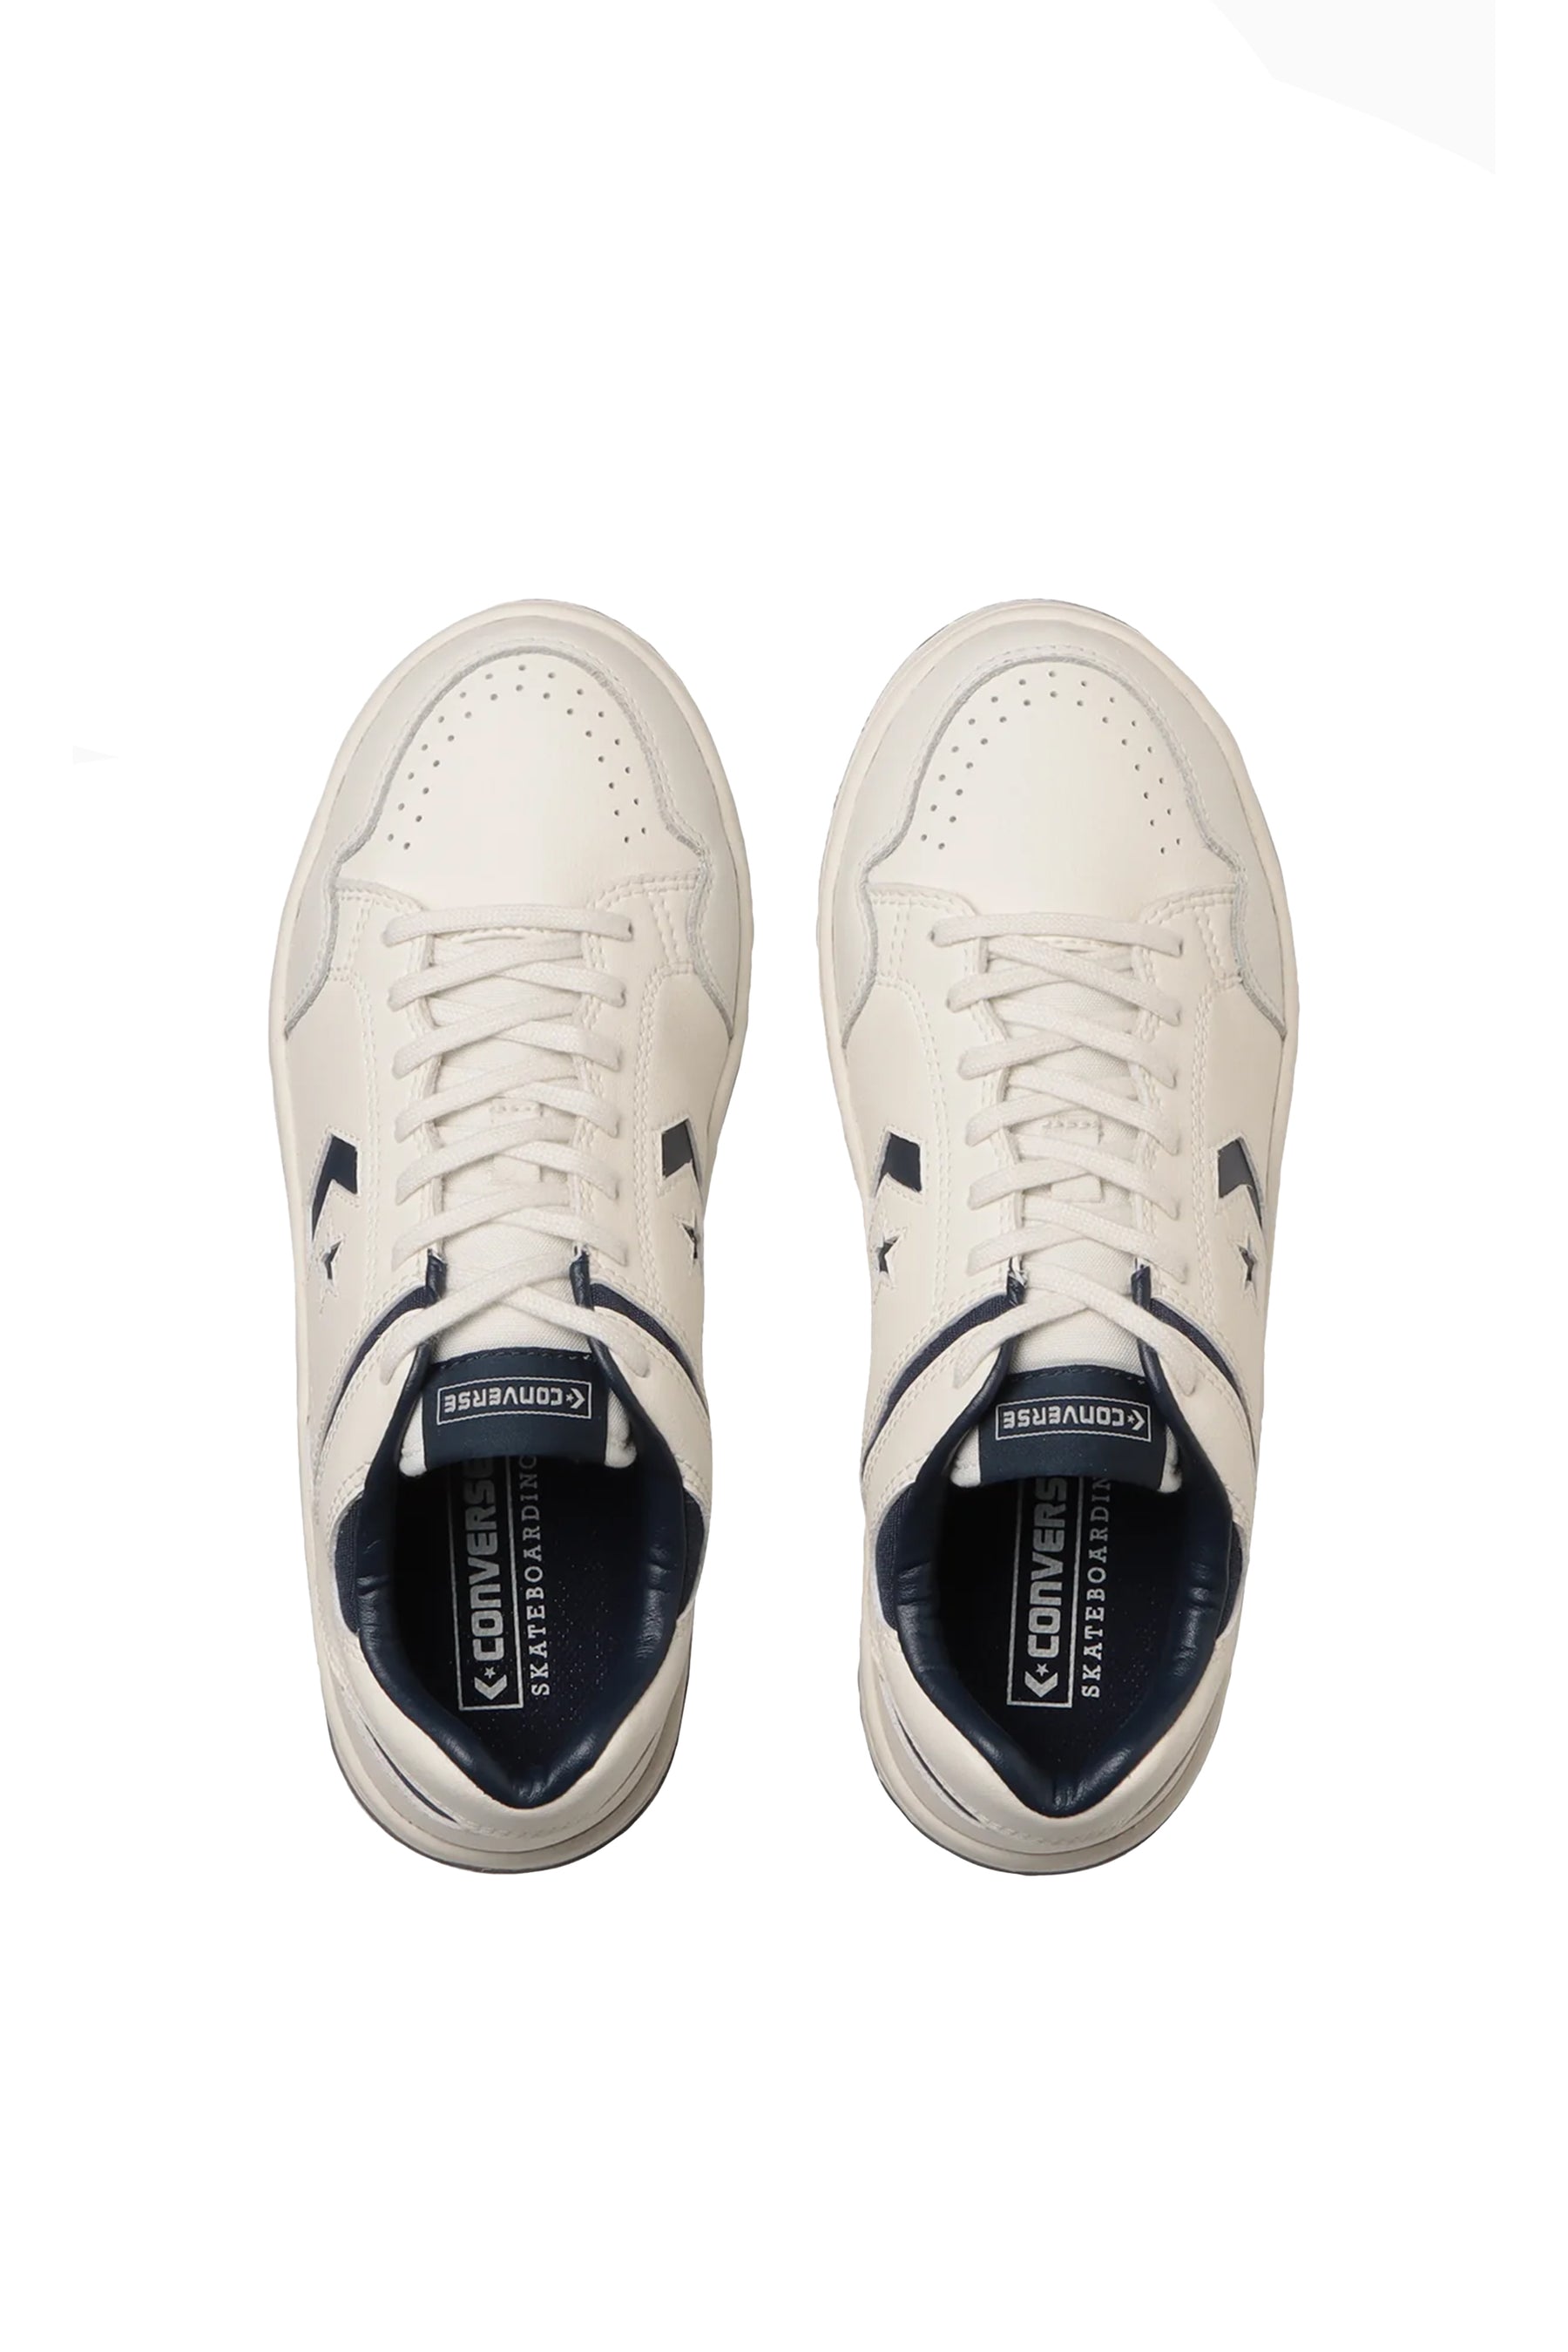 CONVERSE FW23 WEAPON SK OX / WHT NVY -NUBIAN